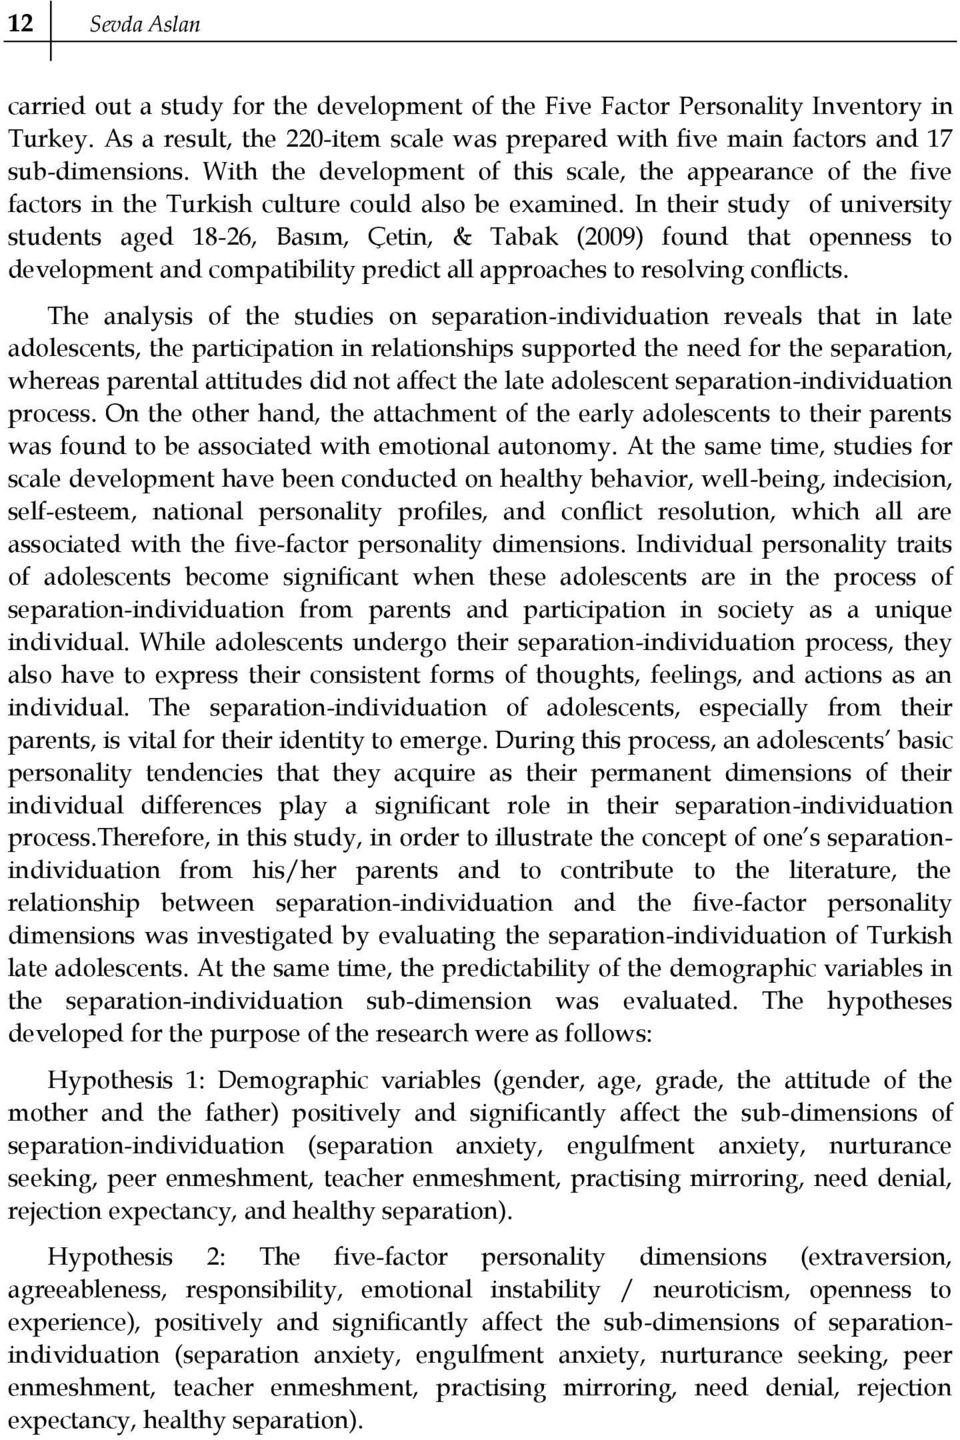 In their study of university students aged 18-26, Basım, Çetin, & Tabak (2009) found that openness to development and compatibility predict all approaches to resolving conflicts.